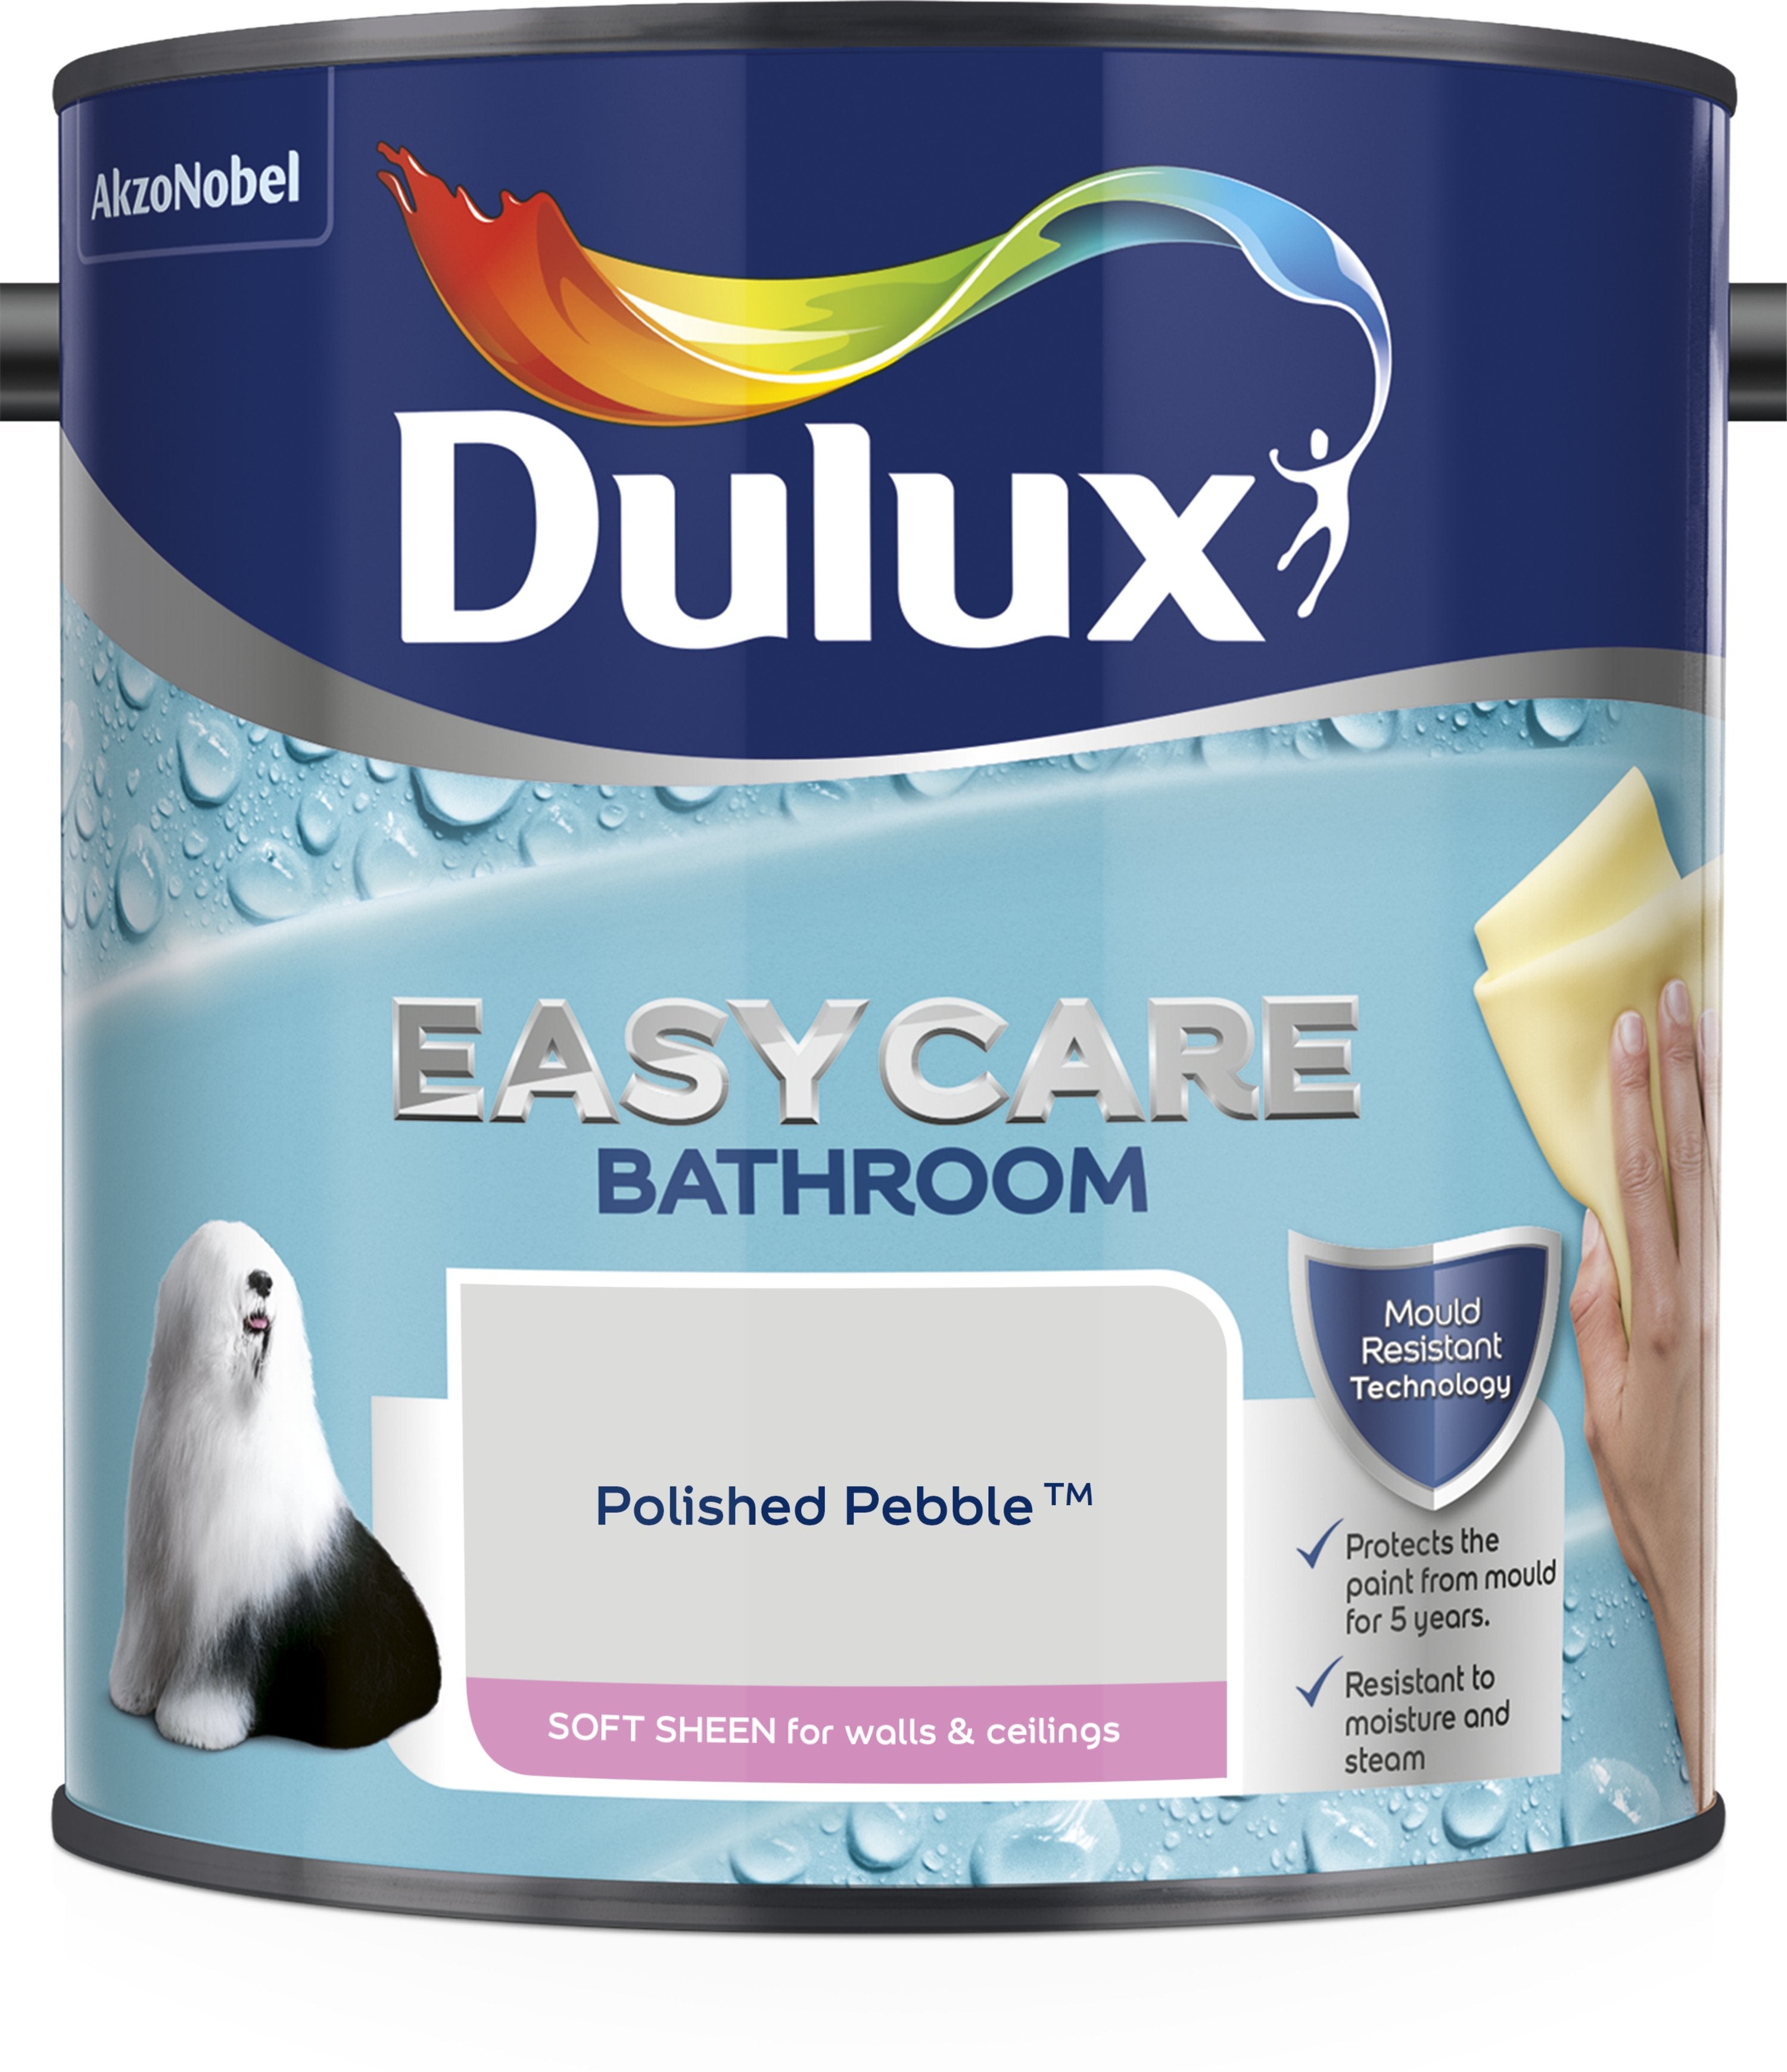 Dulux-Easycare-Bathroom-Soft-Sheen-Emulsion-Paint For-Walls-And-Ceilings-Polished-Pebble-2.5L